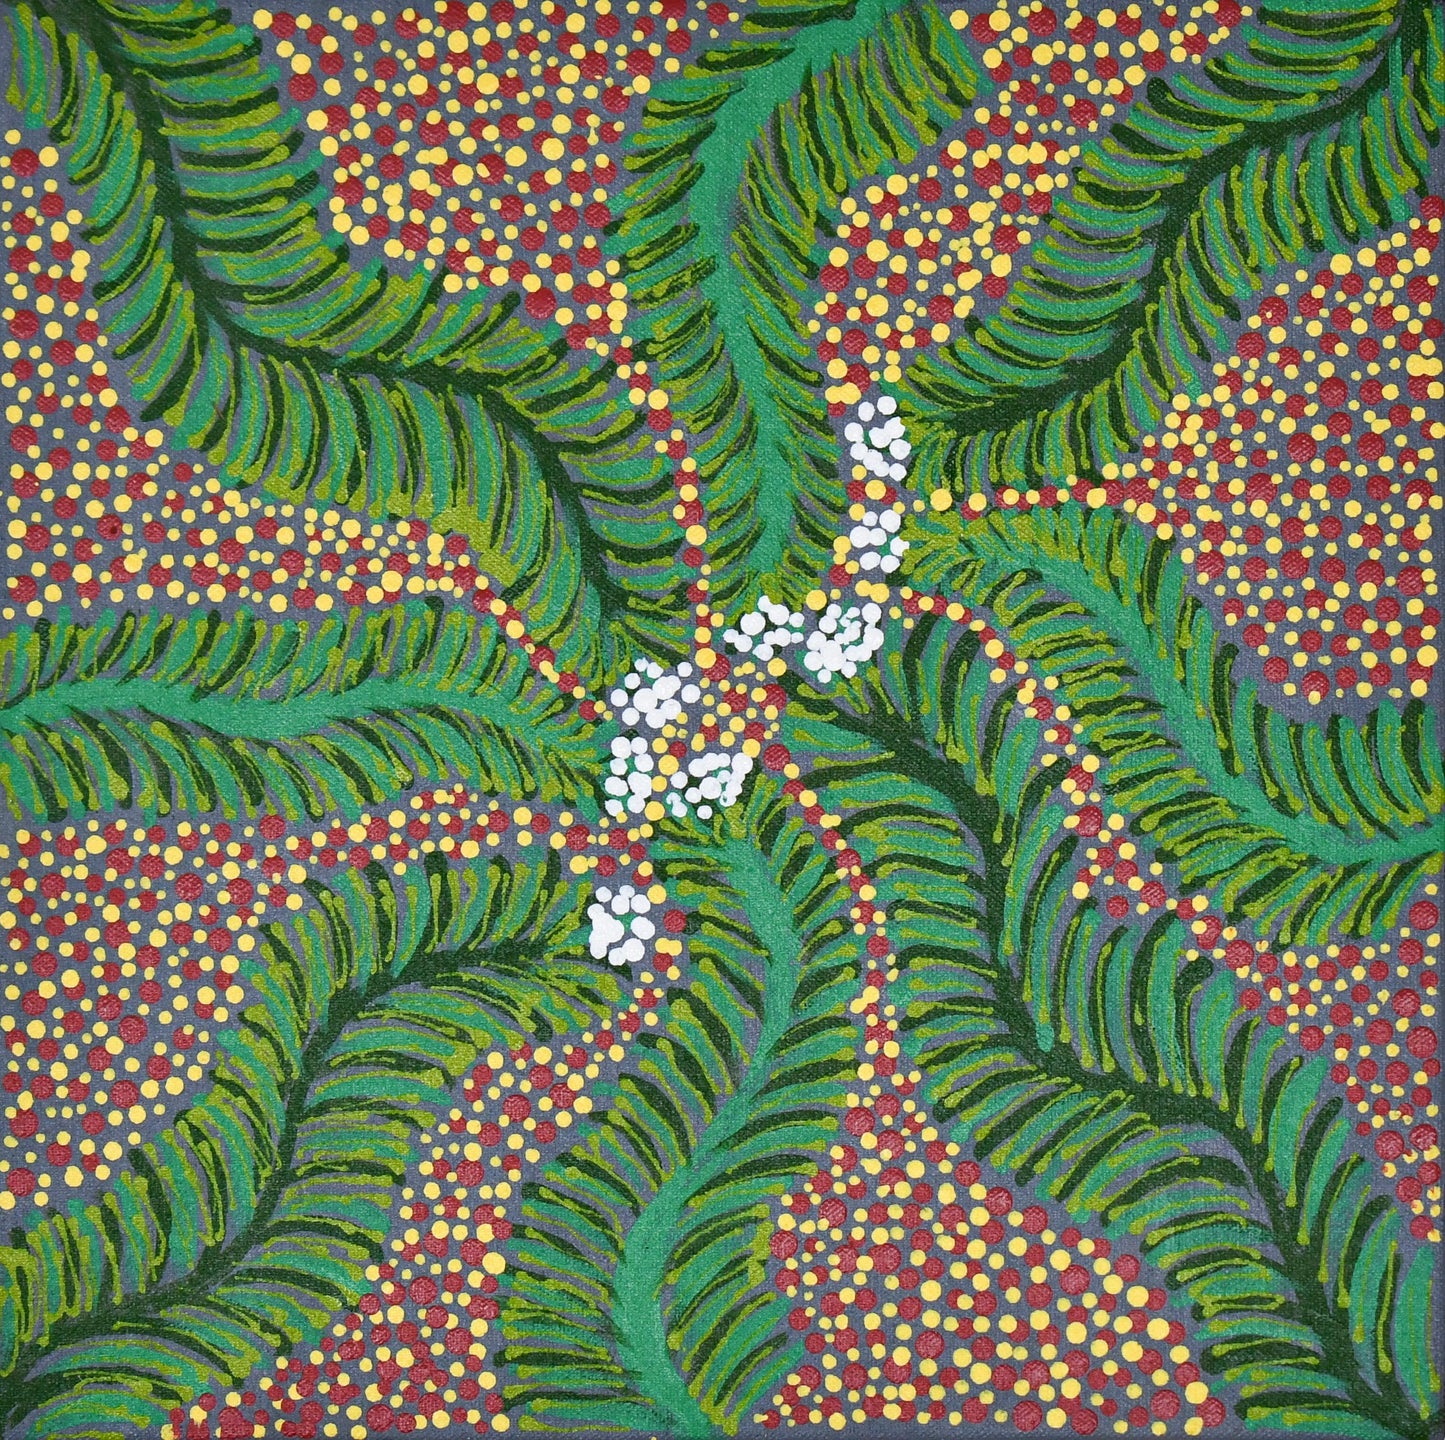 Bush Medicine In My Mother's Country, 30x30cm